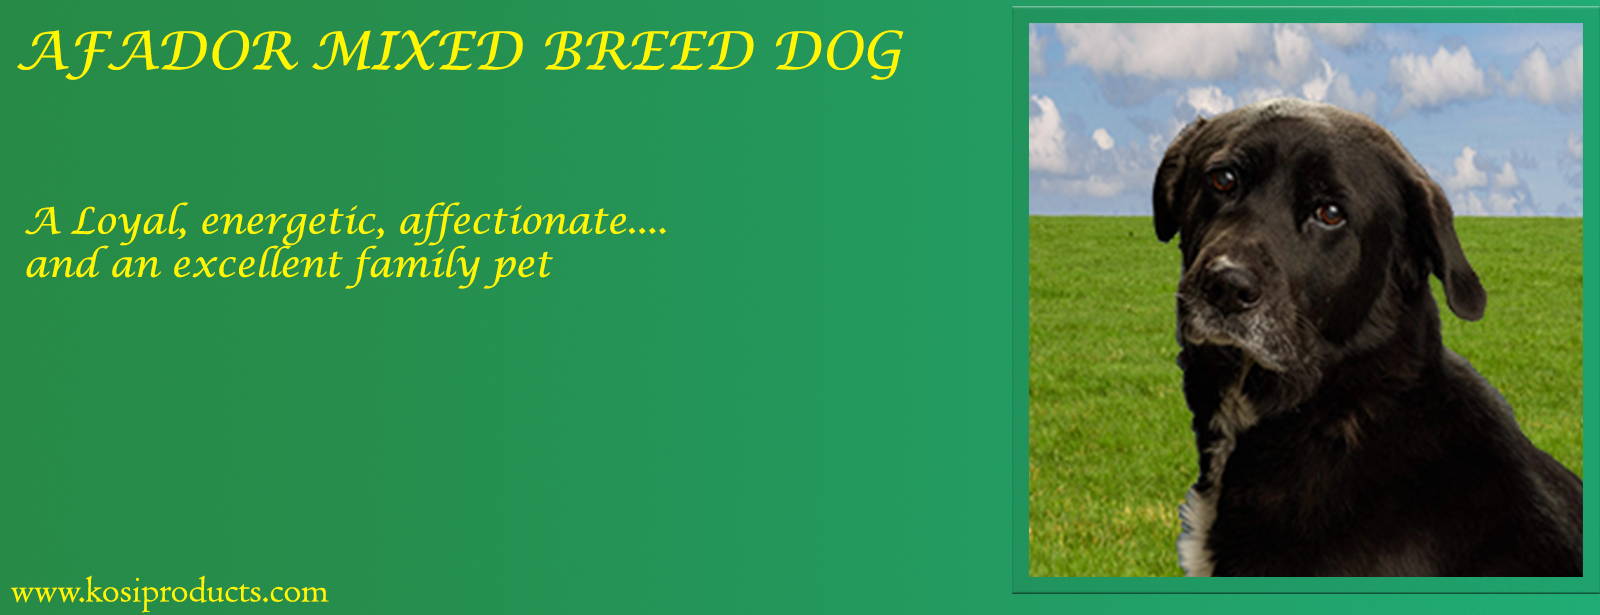 Afador Mixed Breed Dog Profile, Nutrition, Health, Comfort and Lifestyle 